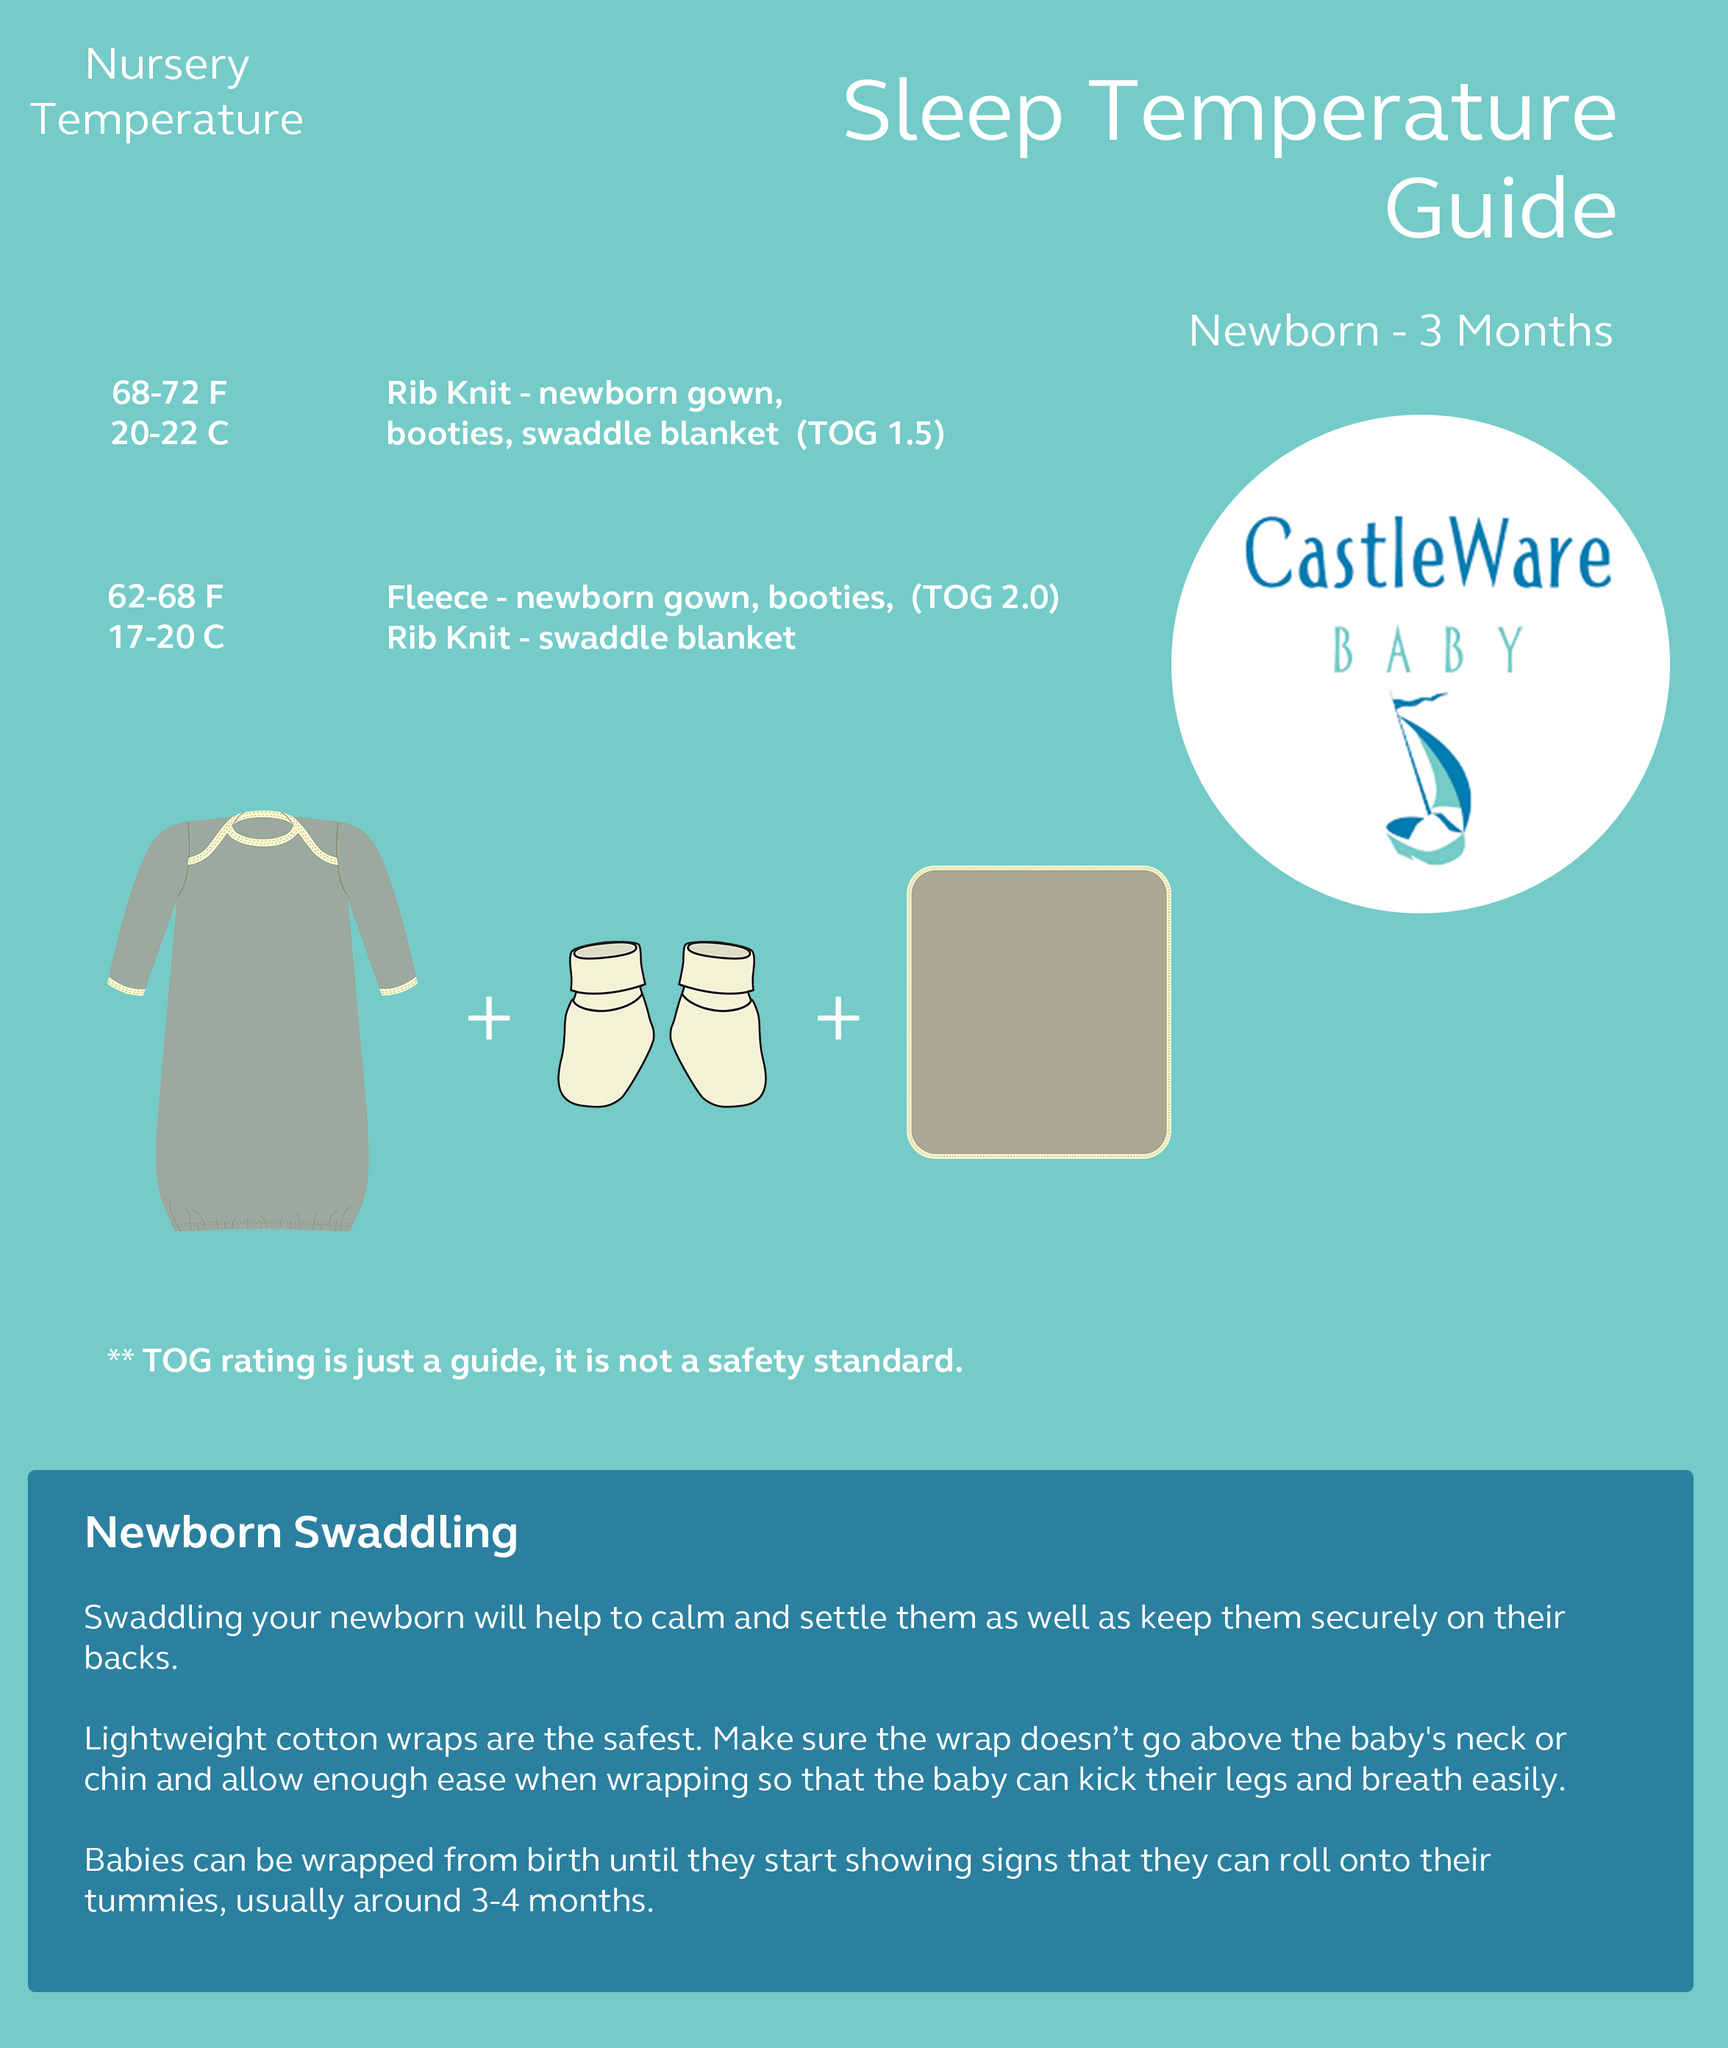 CastleWare Baby sleep temperature guide for newborns. Info graphic with text.